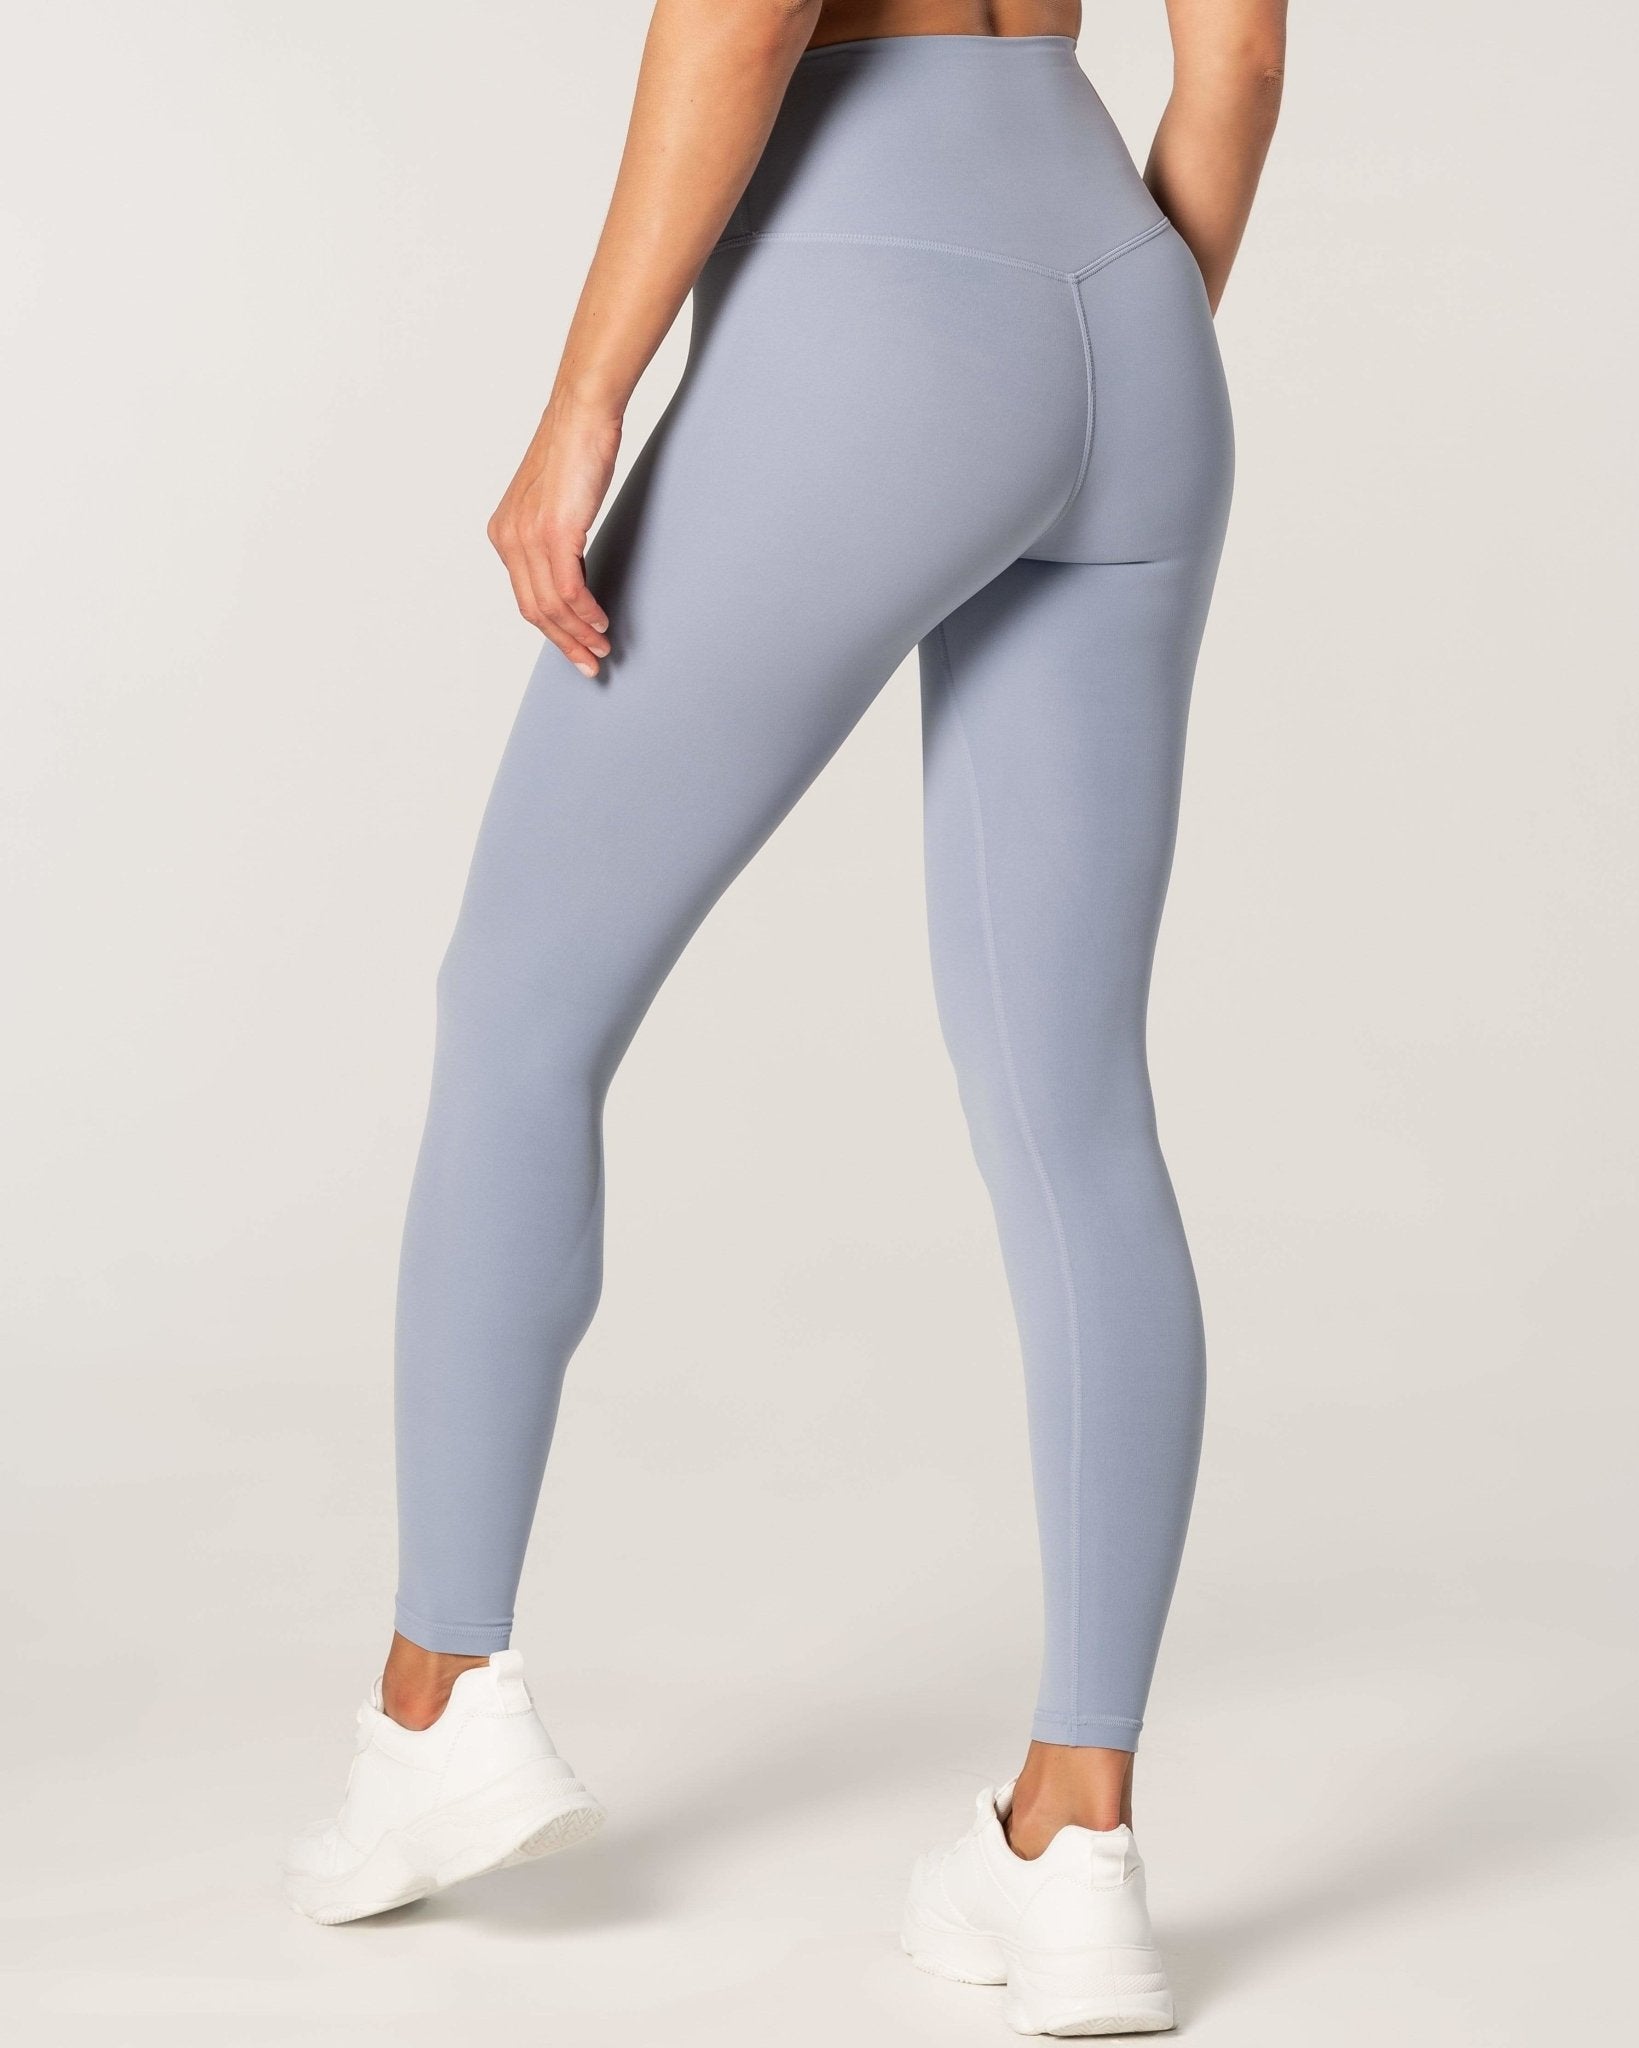 Mercy Tights - Light Grey - RELODE